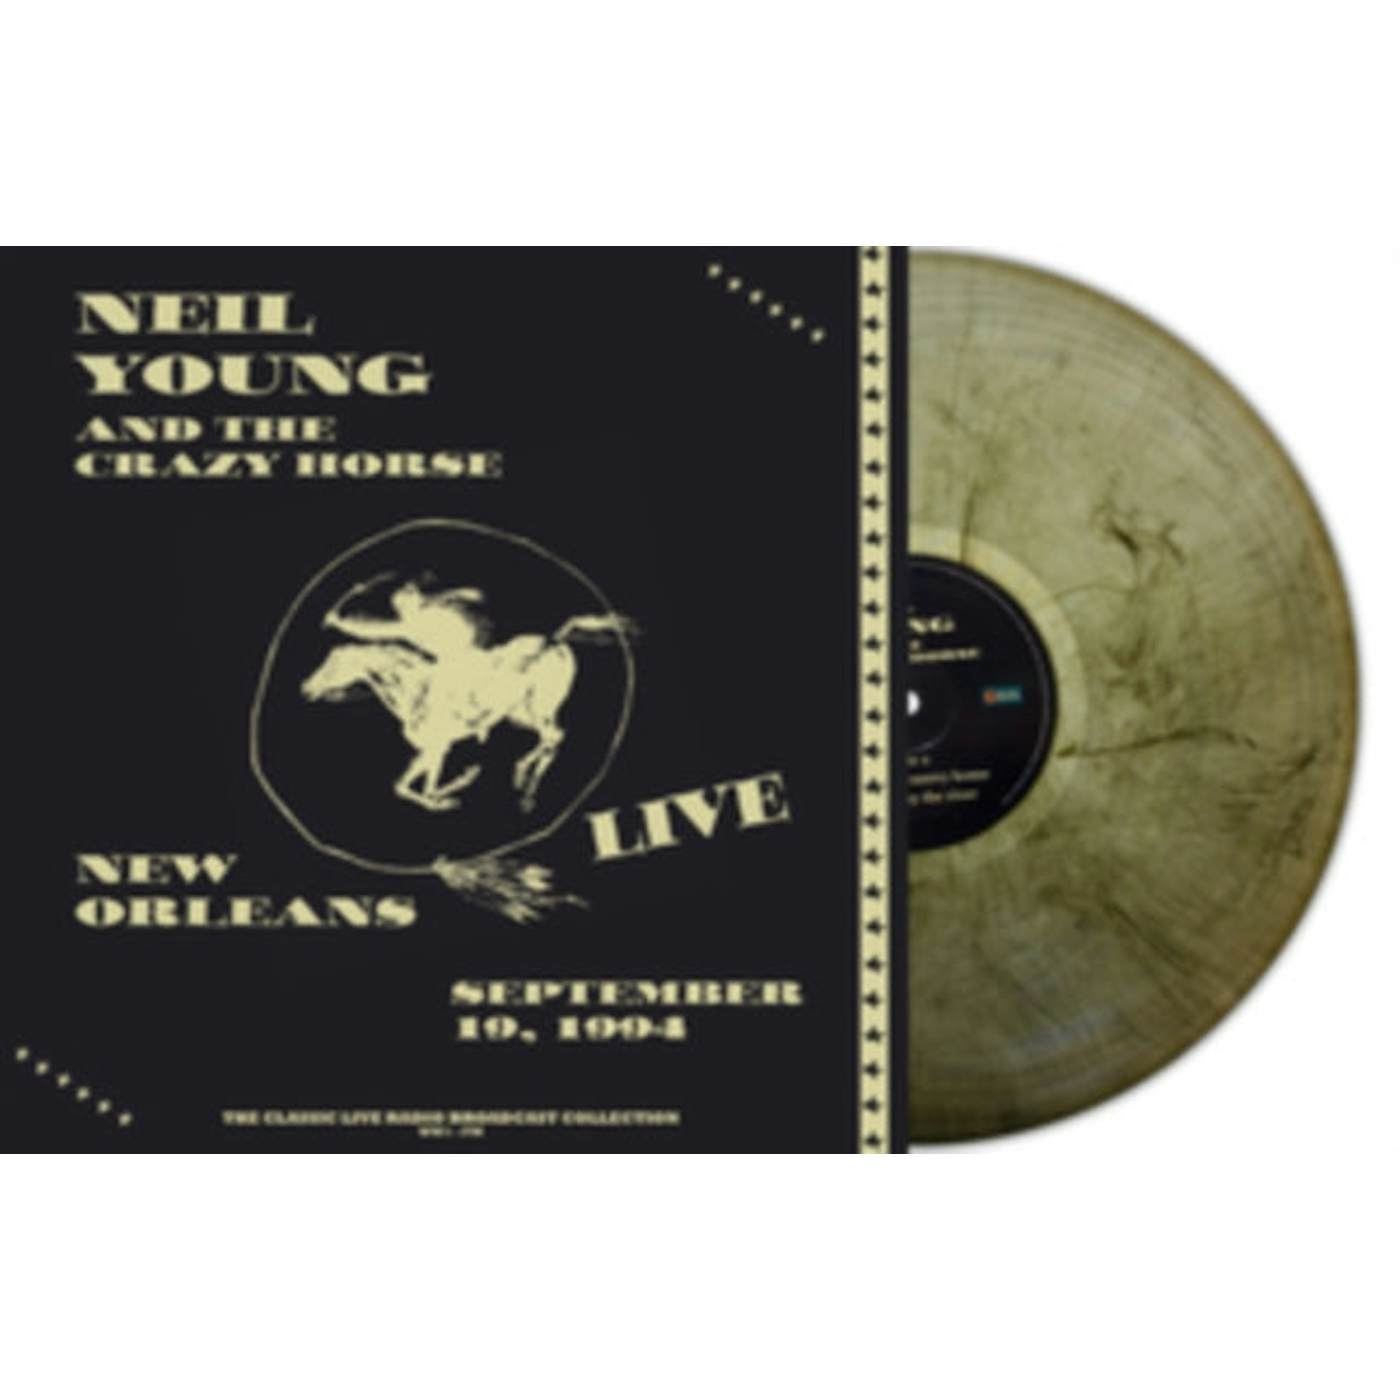 Neil Young & Crazy Horse LP - Live In New Orleans 1994 (Grey Marble Vinyl)